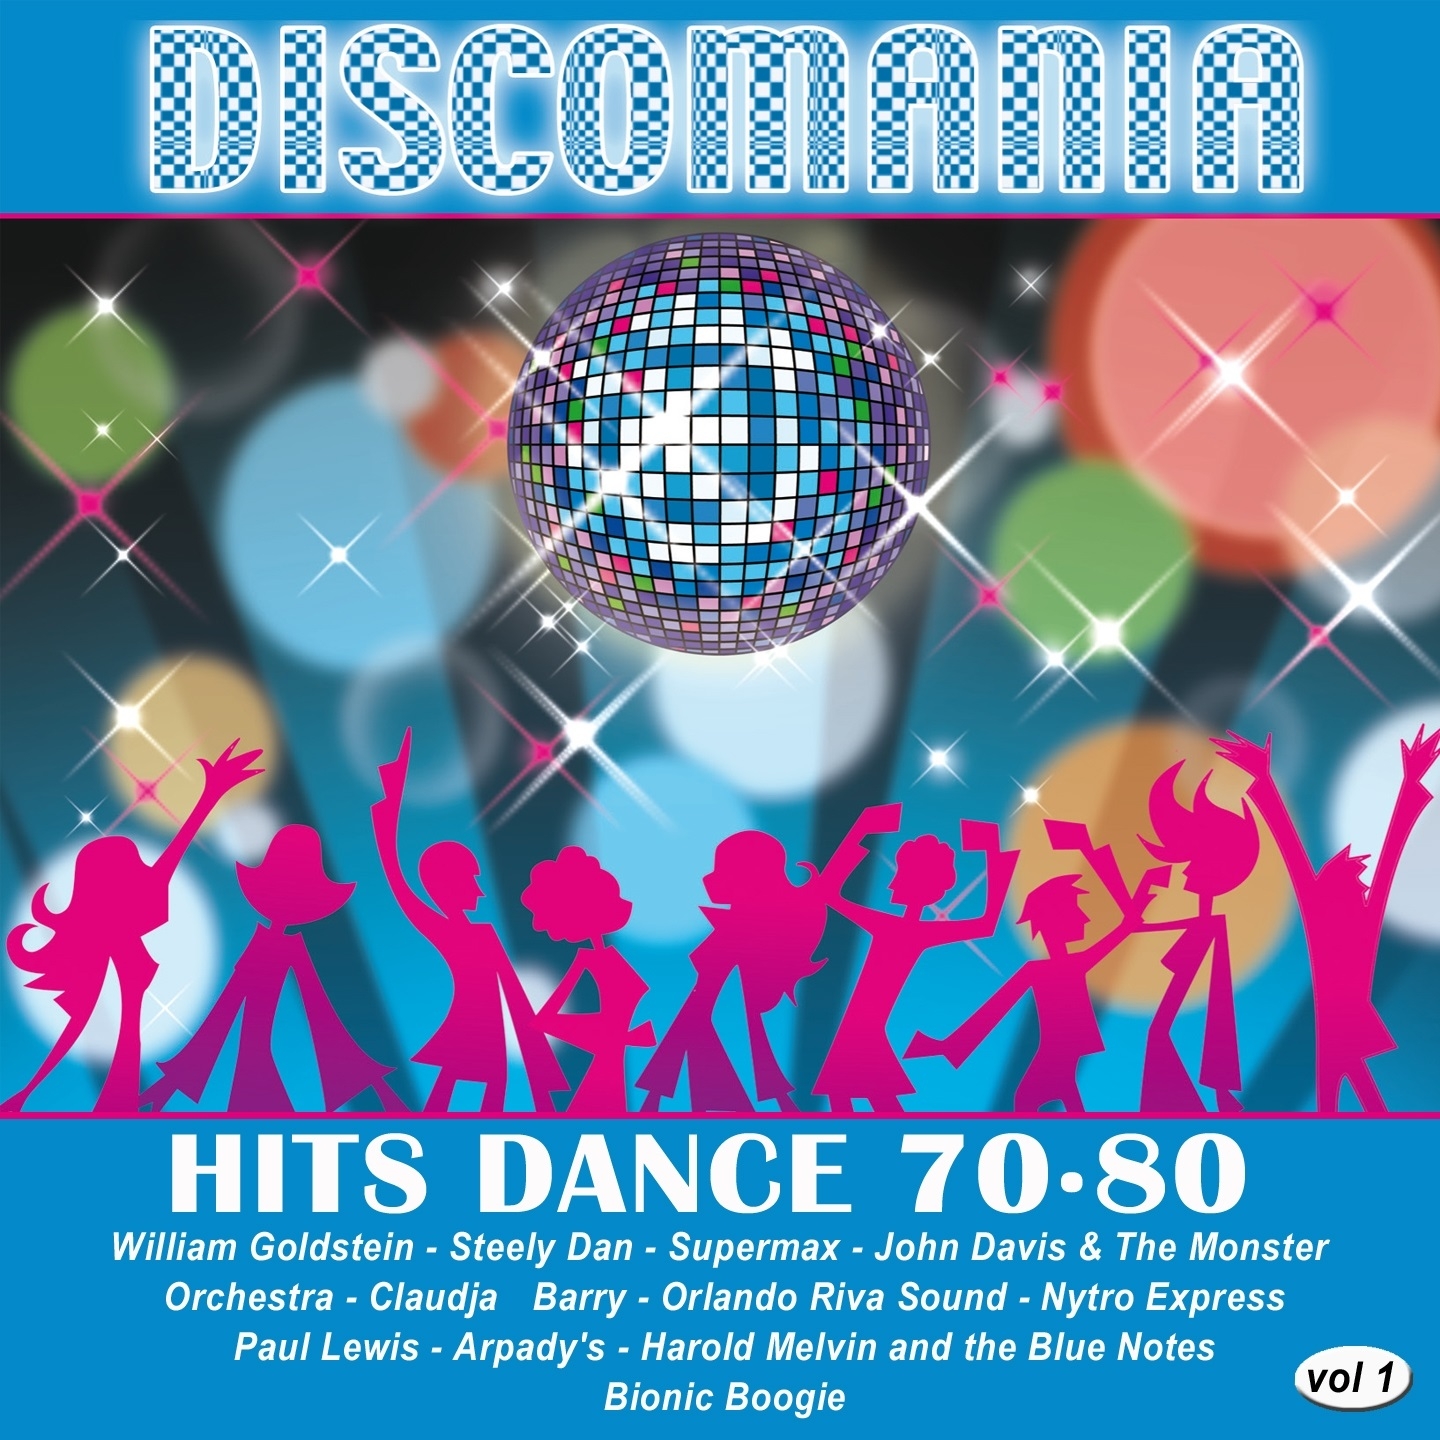 6.9-Discomania: Hits Dance 70-80, Vol. 1 - Midnight Rapsody, Dance Little Dreamer, And Other 9 Hits